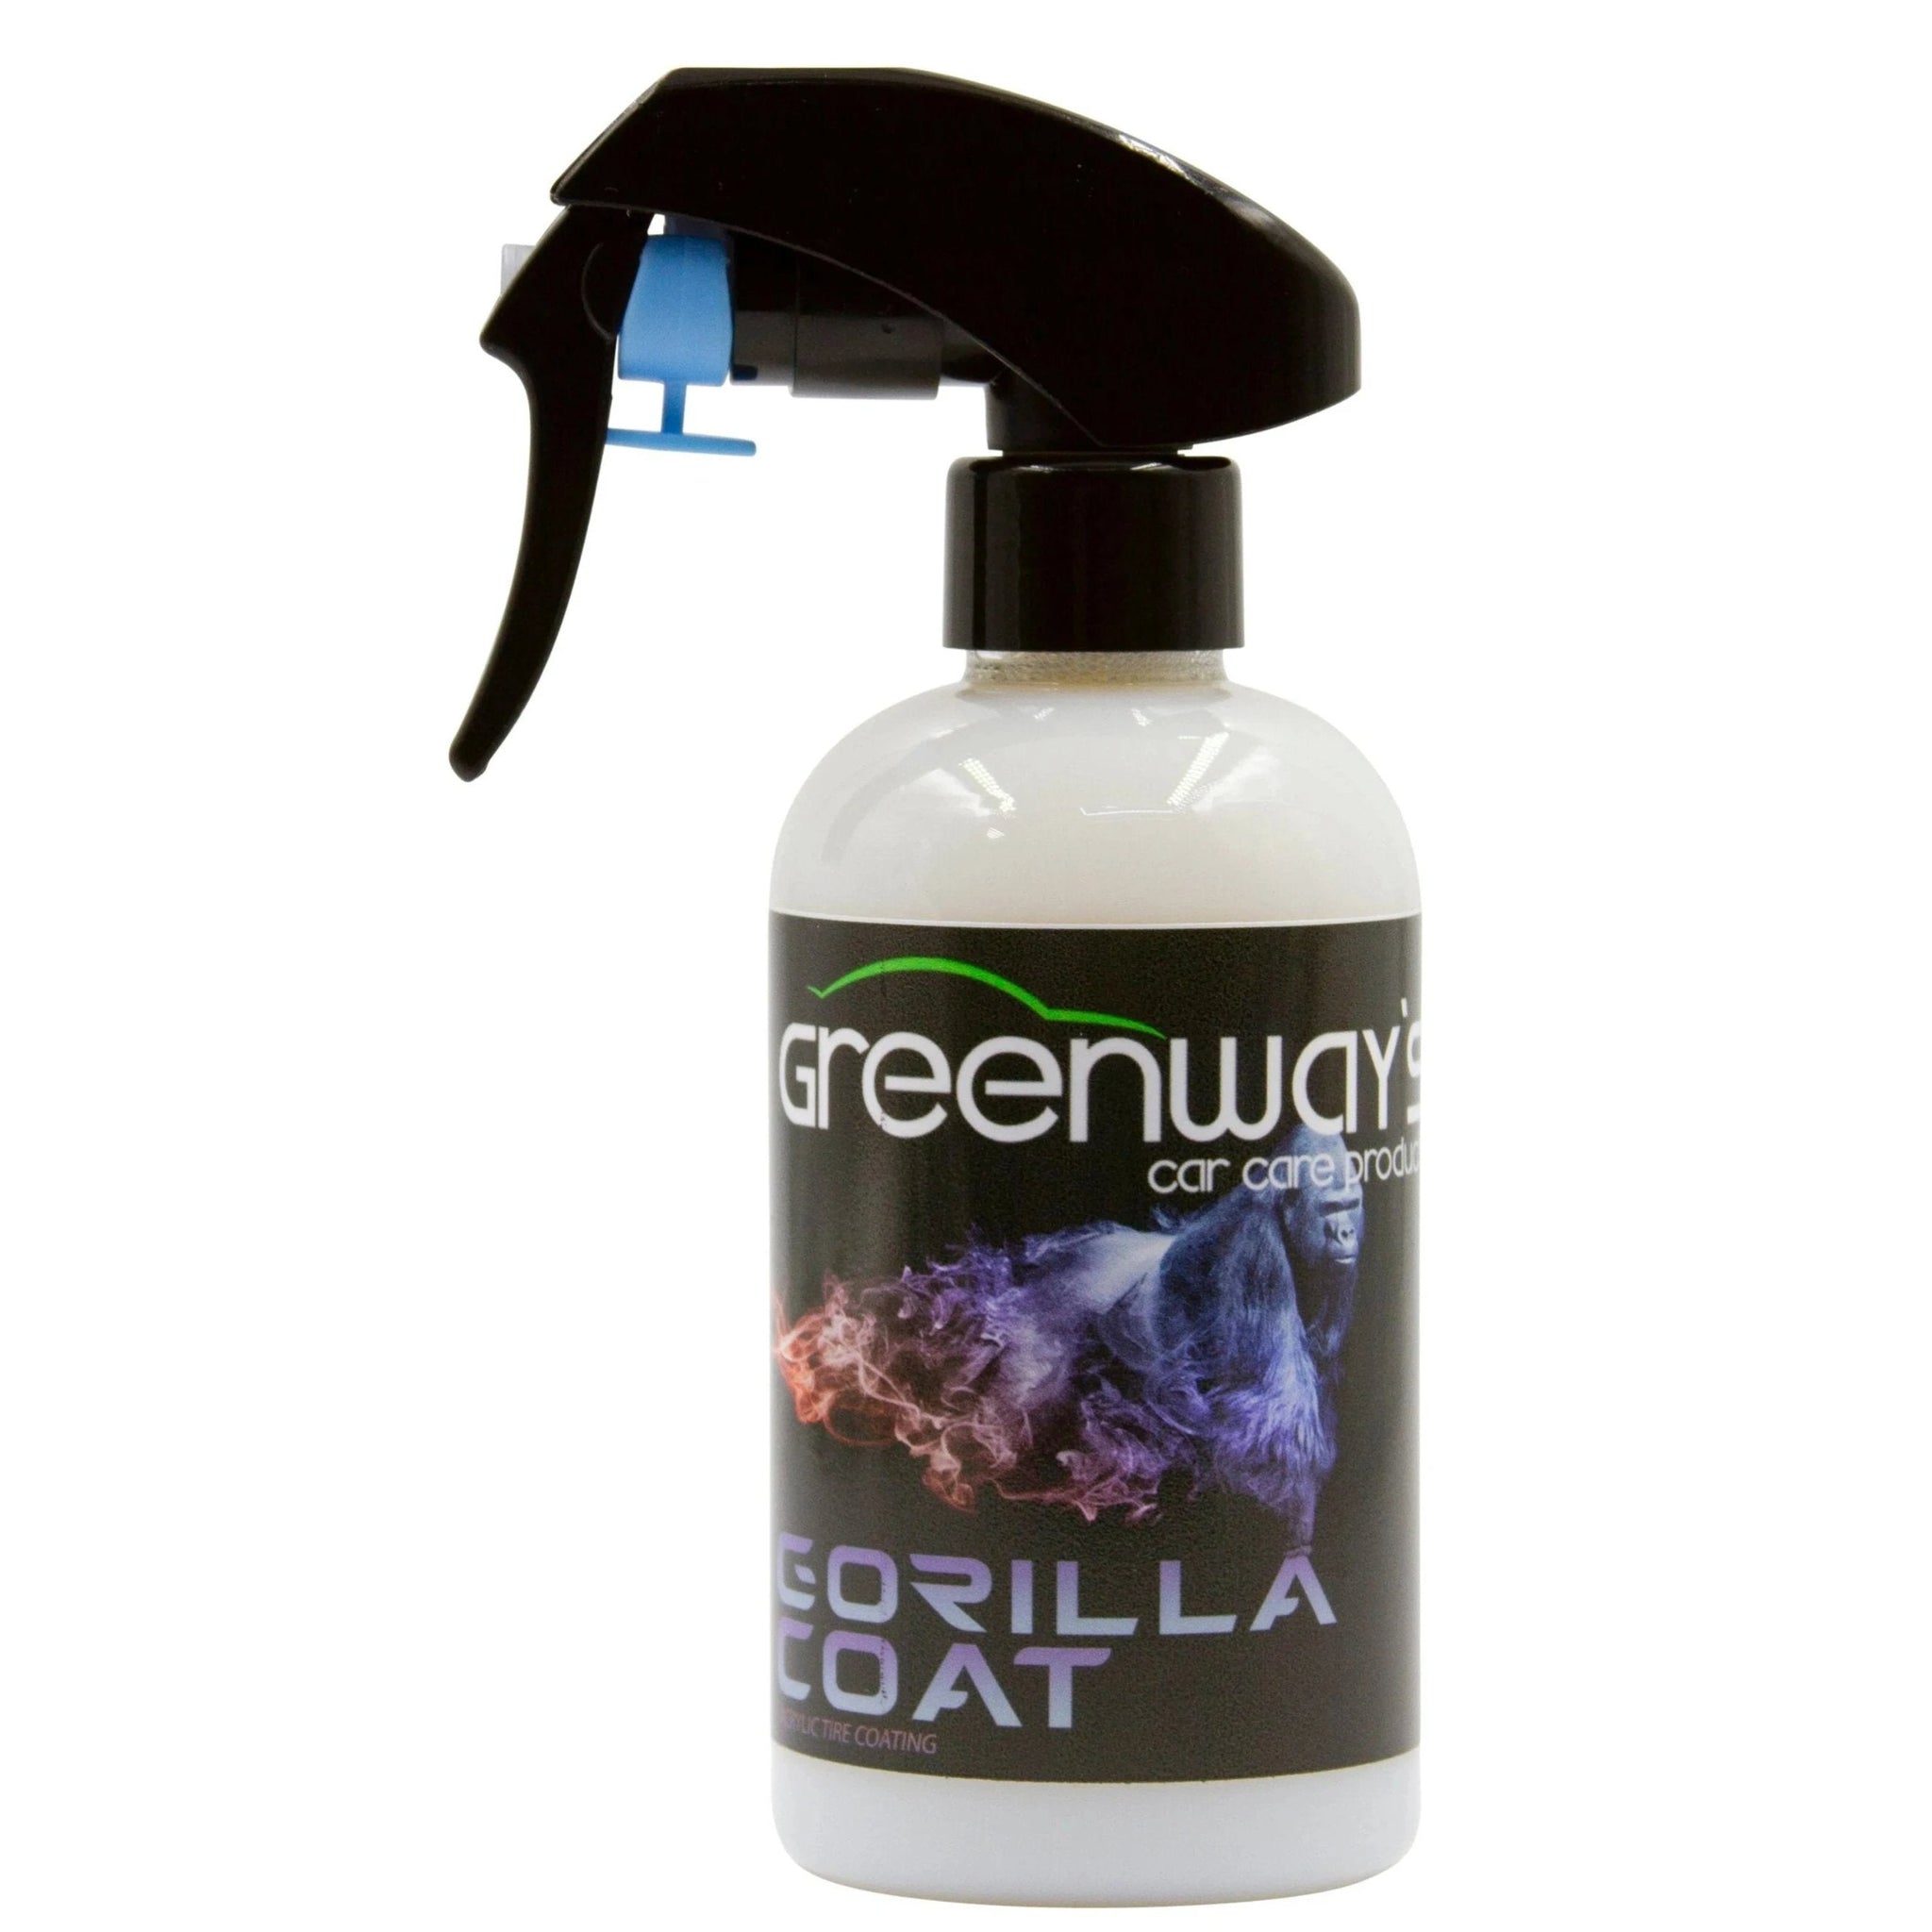 Greenway’s Car Care Products Gorilla Coat, semi-permanent, hydrophobic, satin or high gloss acrylic tire shine coating, 8 ounces.